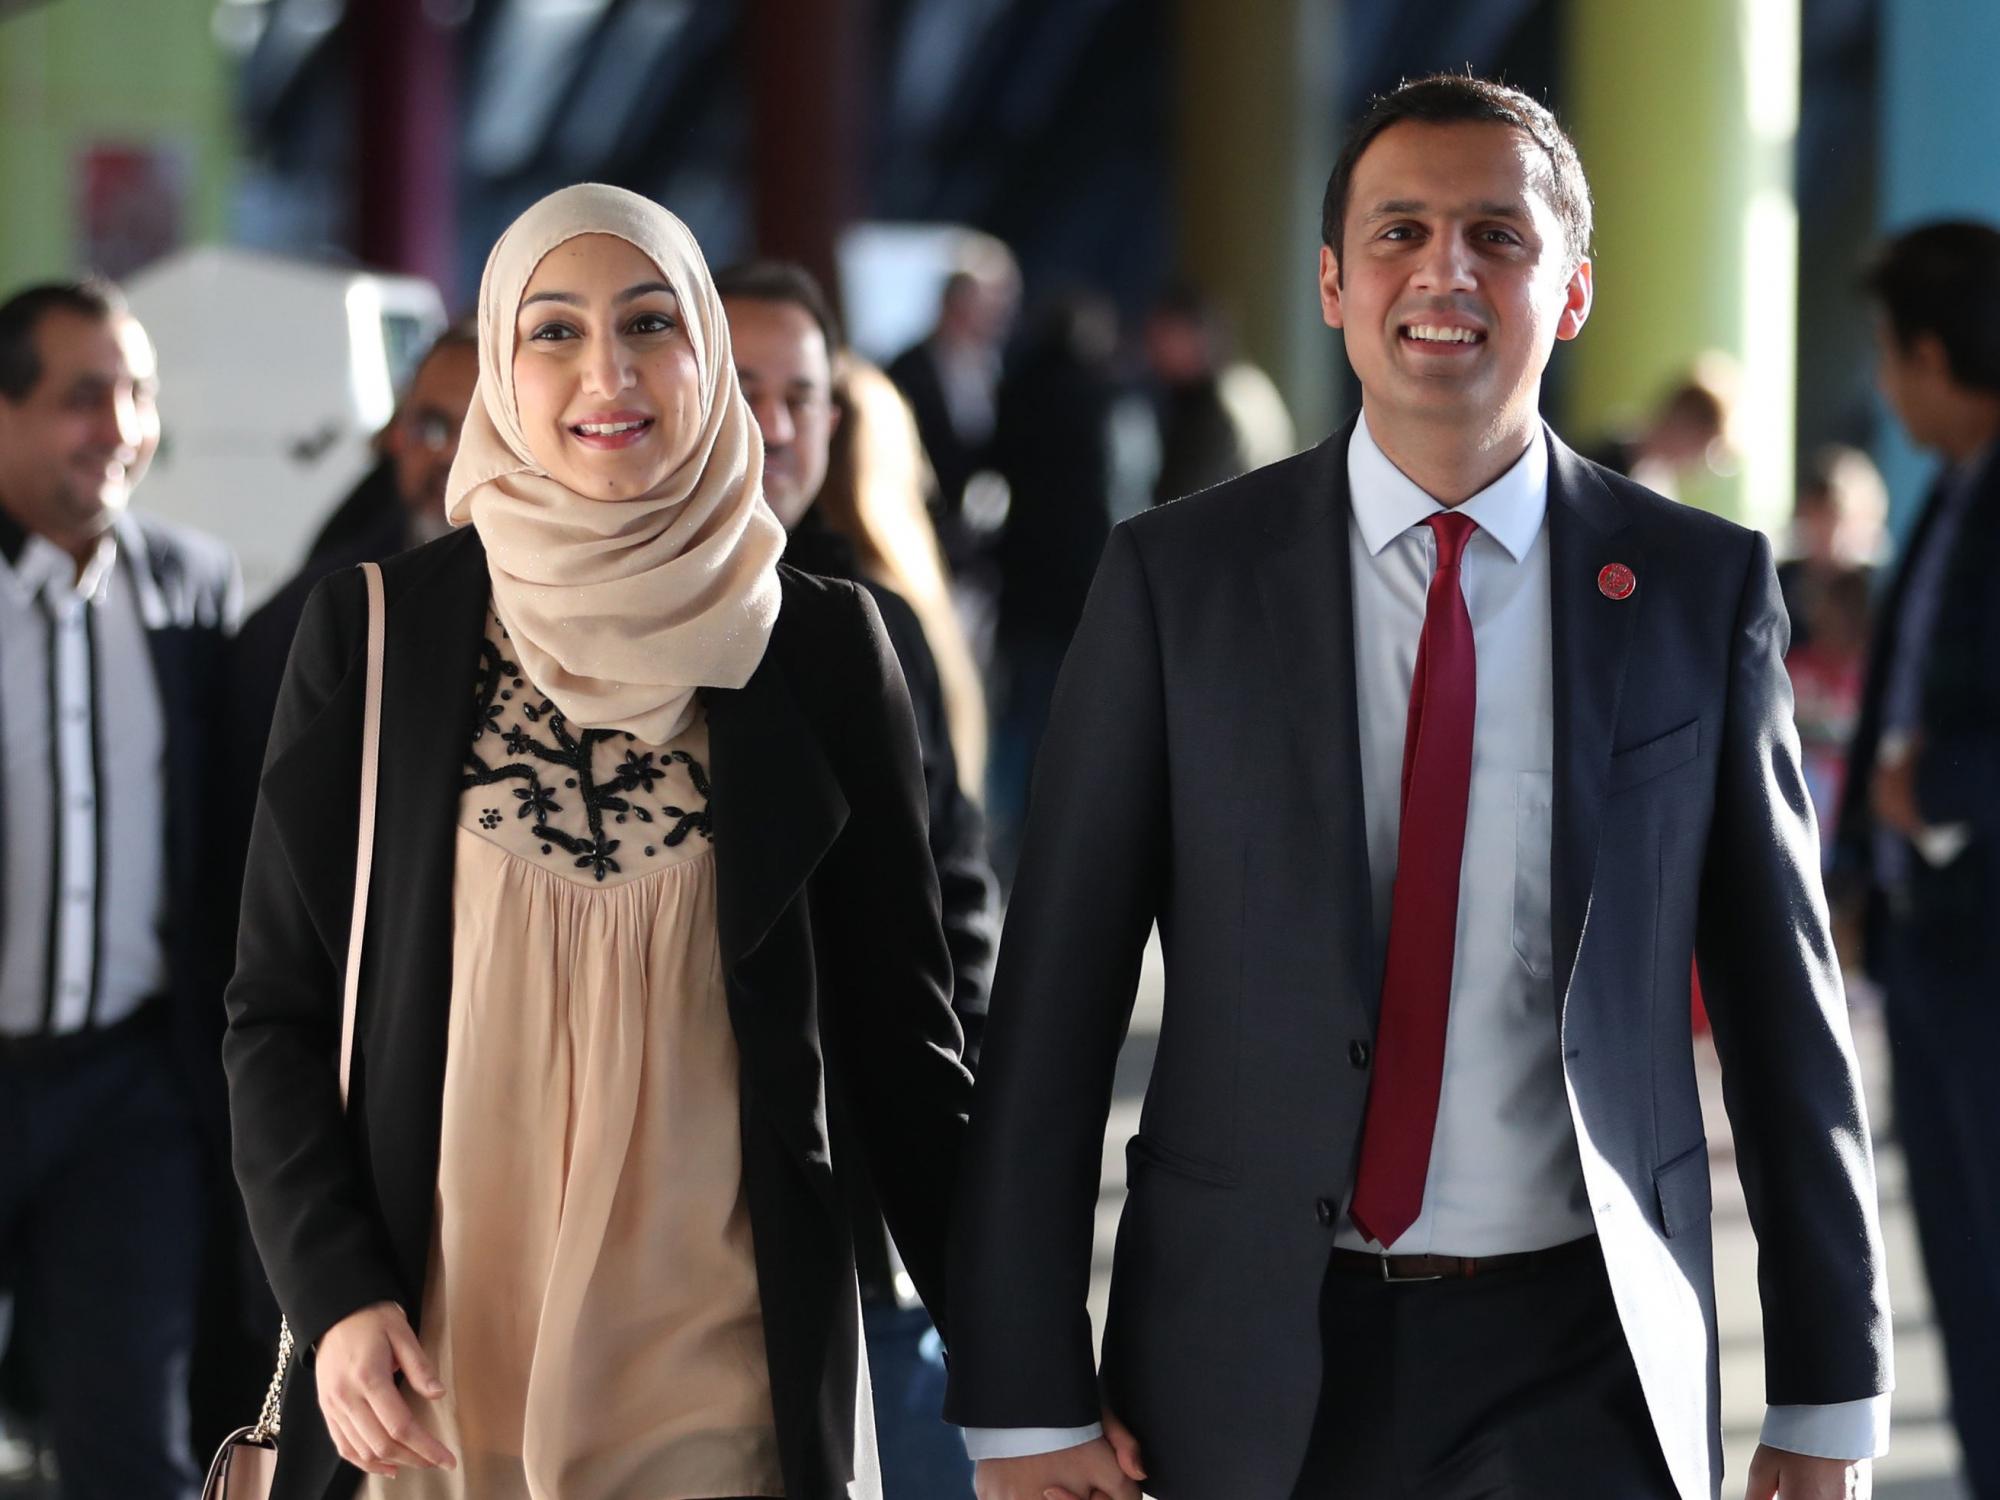 Speaking out about racism the right thing to do, Anas Sarwar says